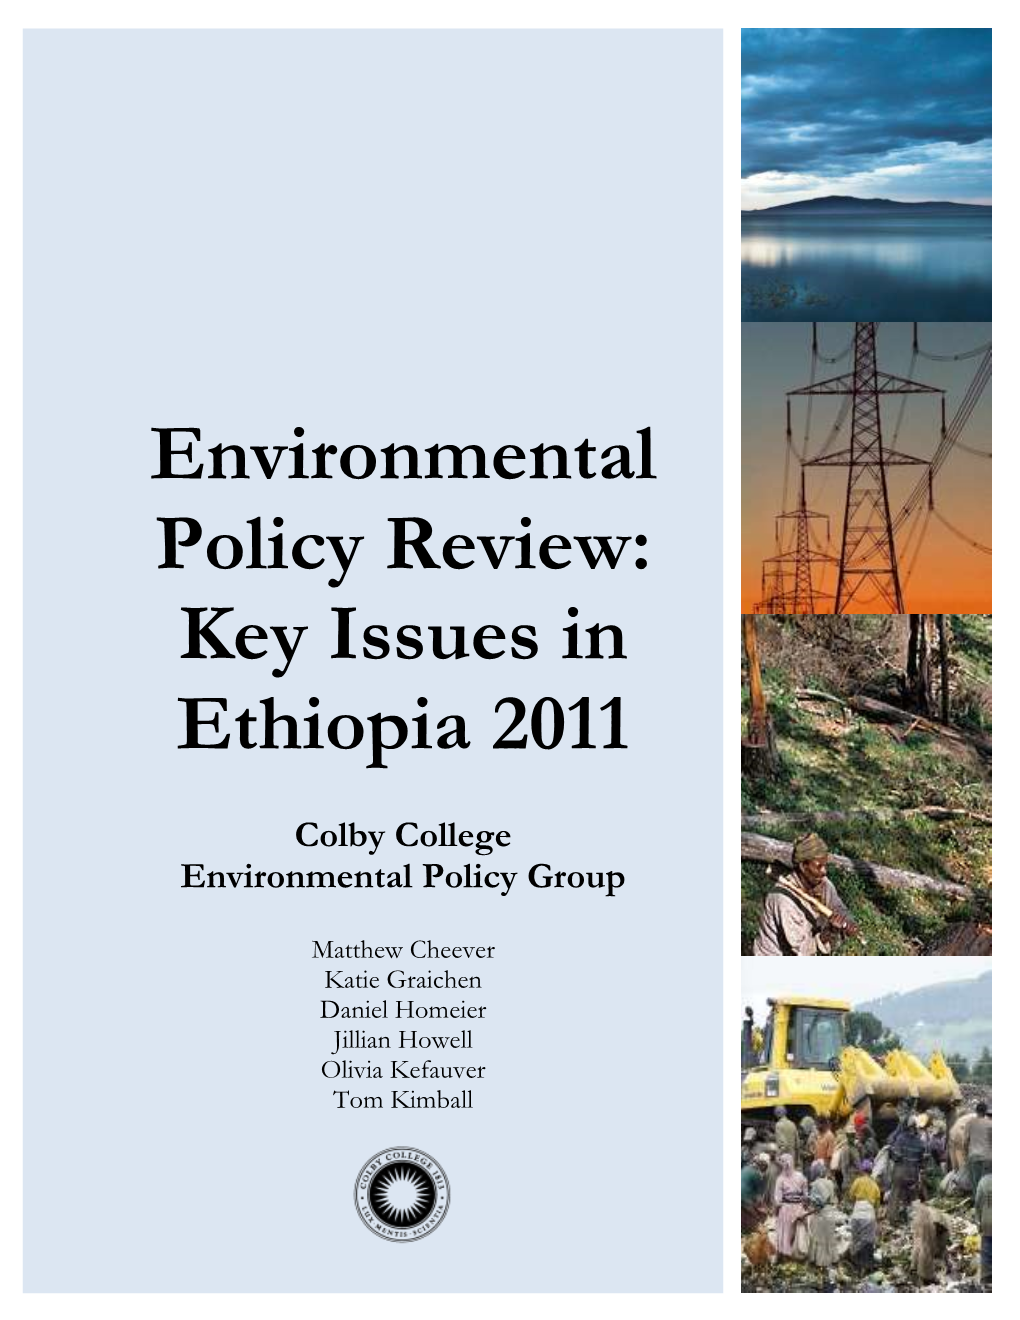 Environmental Policy Review: Key Issues in Ethiopia 2011